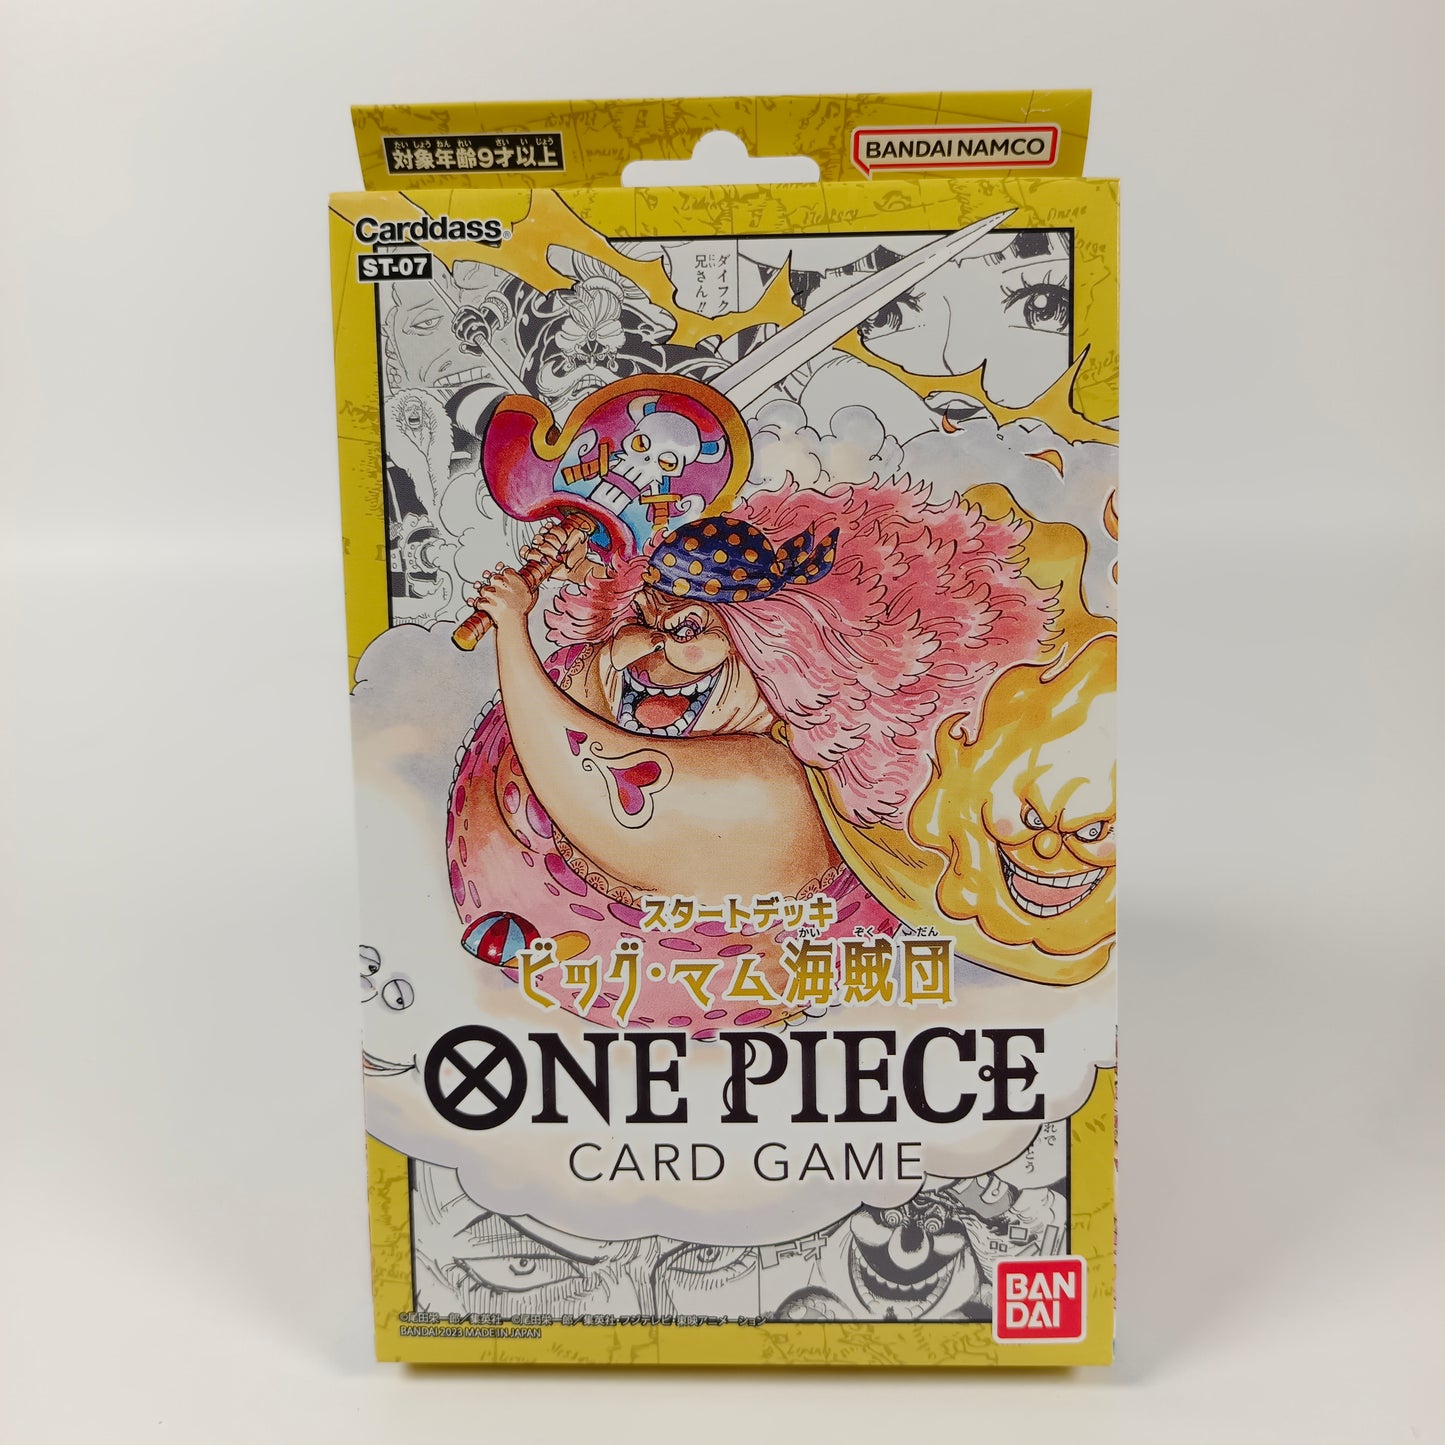 ONE PIECE CARD GAME ST-07